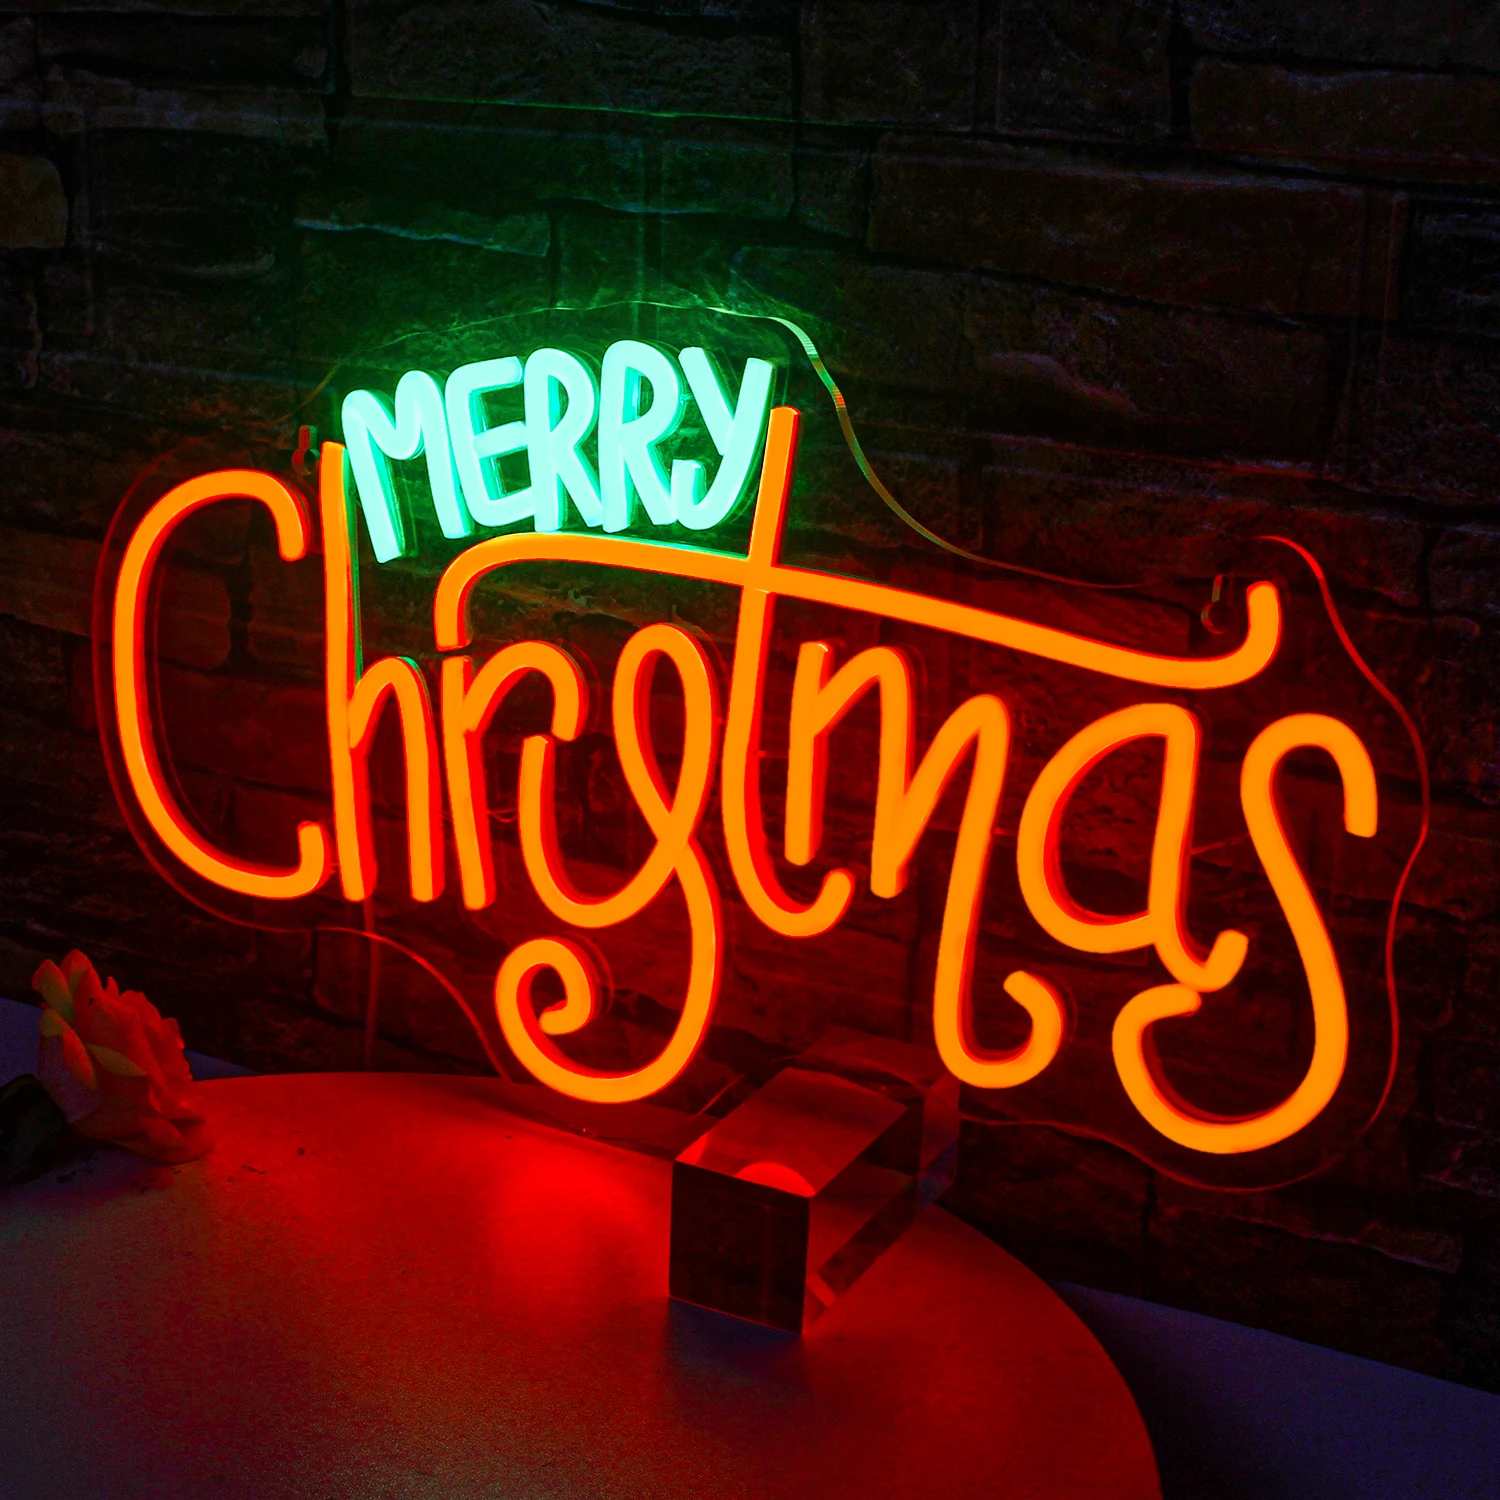 Merry Christmas Neon Sign Led Neon Light Wall Decor Usb Light Up Sign Bedroom Home Party Christmas Decorations Family Kids Gifts marry me light up letter wedding neon lights signs will you marry me led sign engagement proposal decorations party neon decor